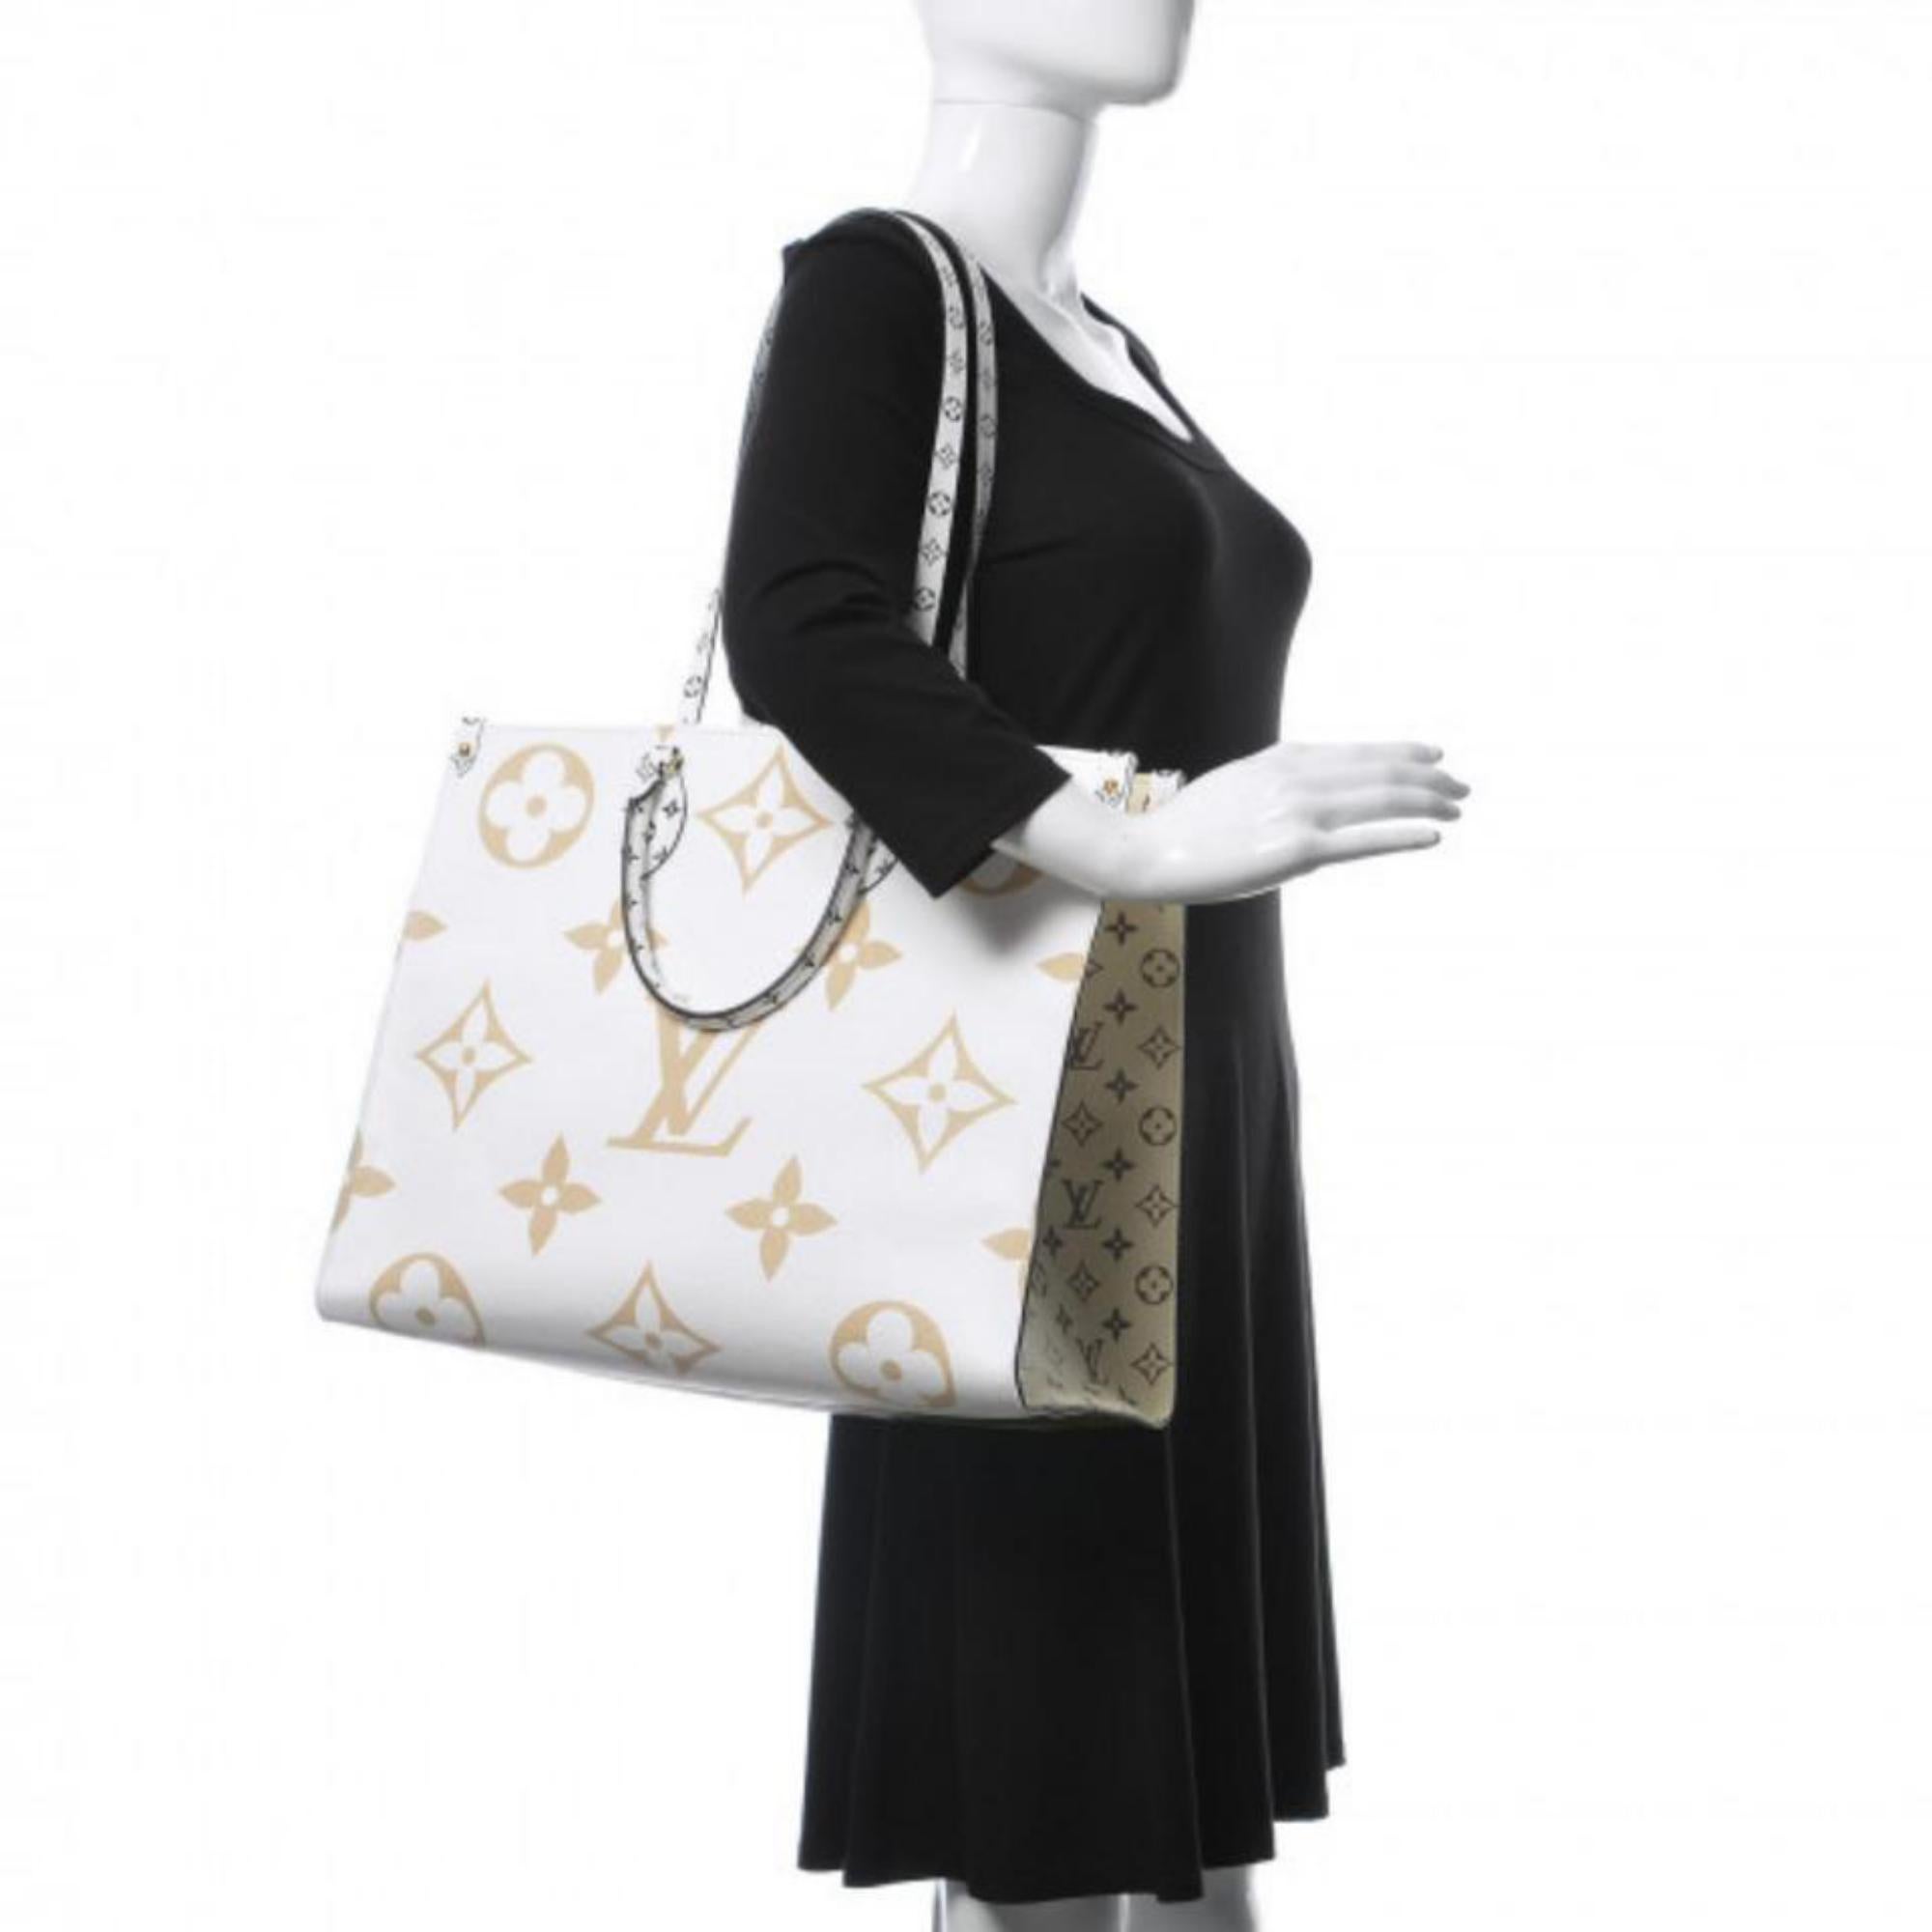 BRAND NEW
(10/10 or N)
Includes Box, Dust Bag, Care Tag and Copy of Receipt
We guarantee this is an authentic LOUIS VUITTON Monogram Giant Onthego Creme or 100% of your money back. This limited edition tote features oversized and smaller sized